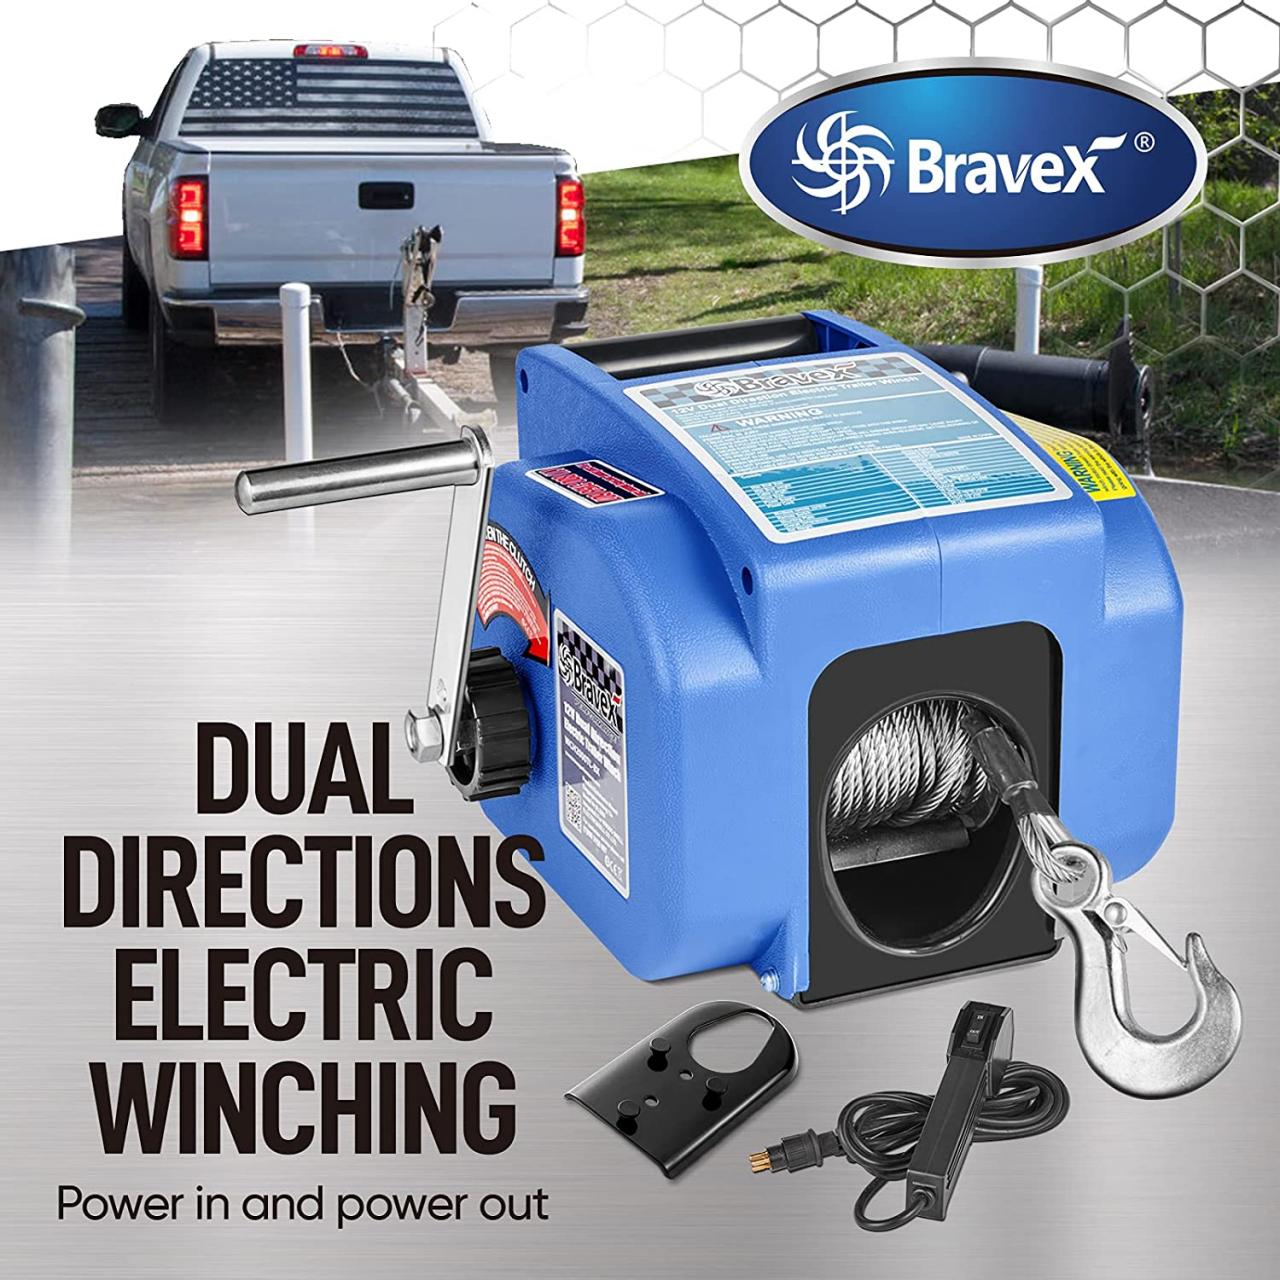 Bravex Boat Trailer Winch Power in or out Free wheel 12V Electric truck  winch,Corded control for Boat up to 6000LBS|Lifting Tools & Accessories| -  AliExpress